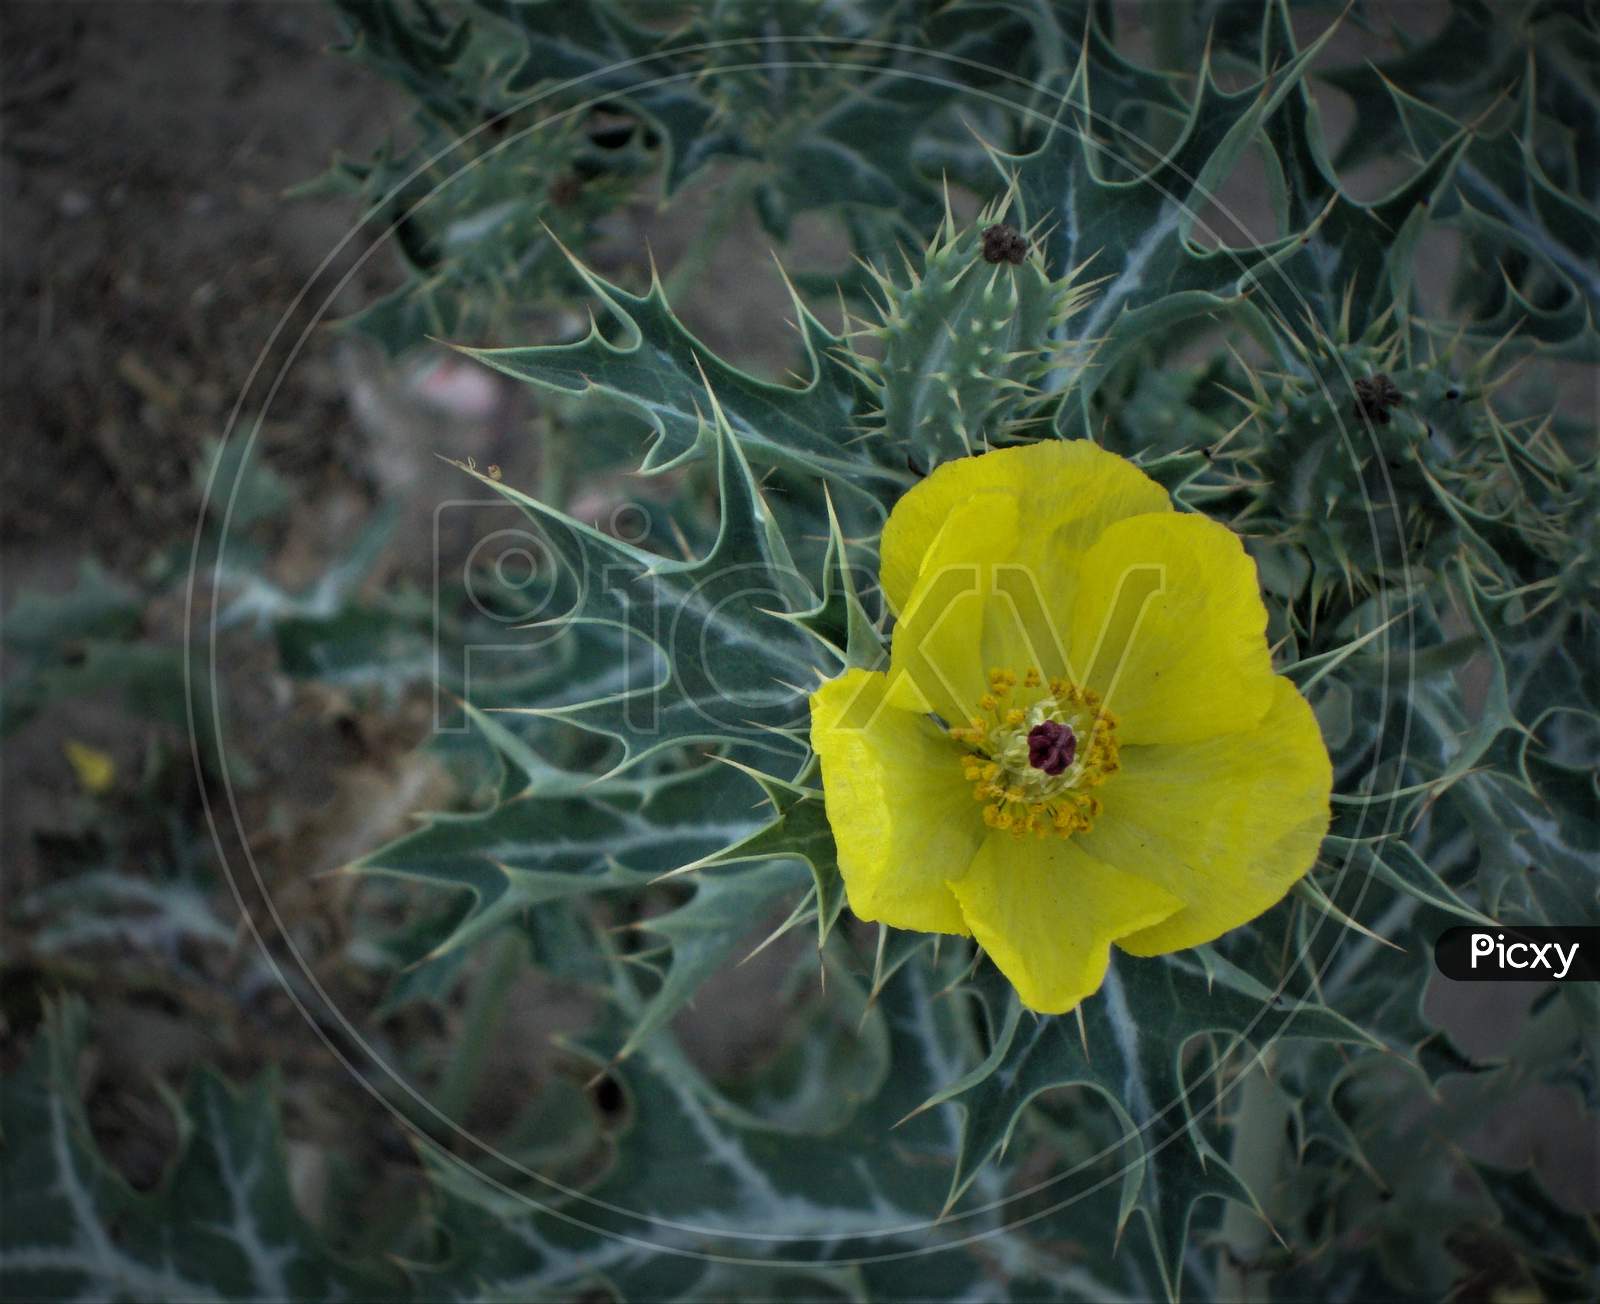 Awesome bright yellow lonely flower smiling within thorny cacti, India